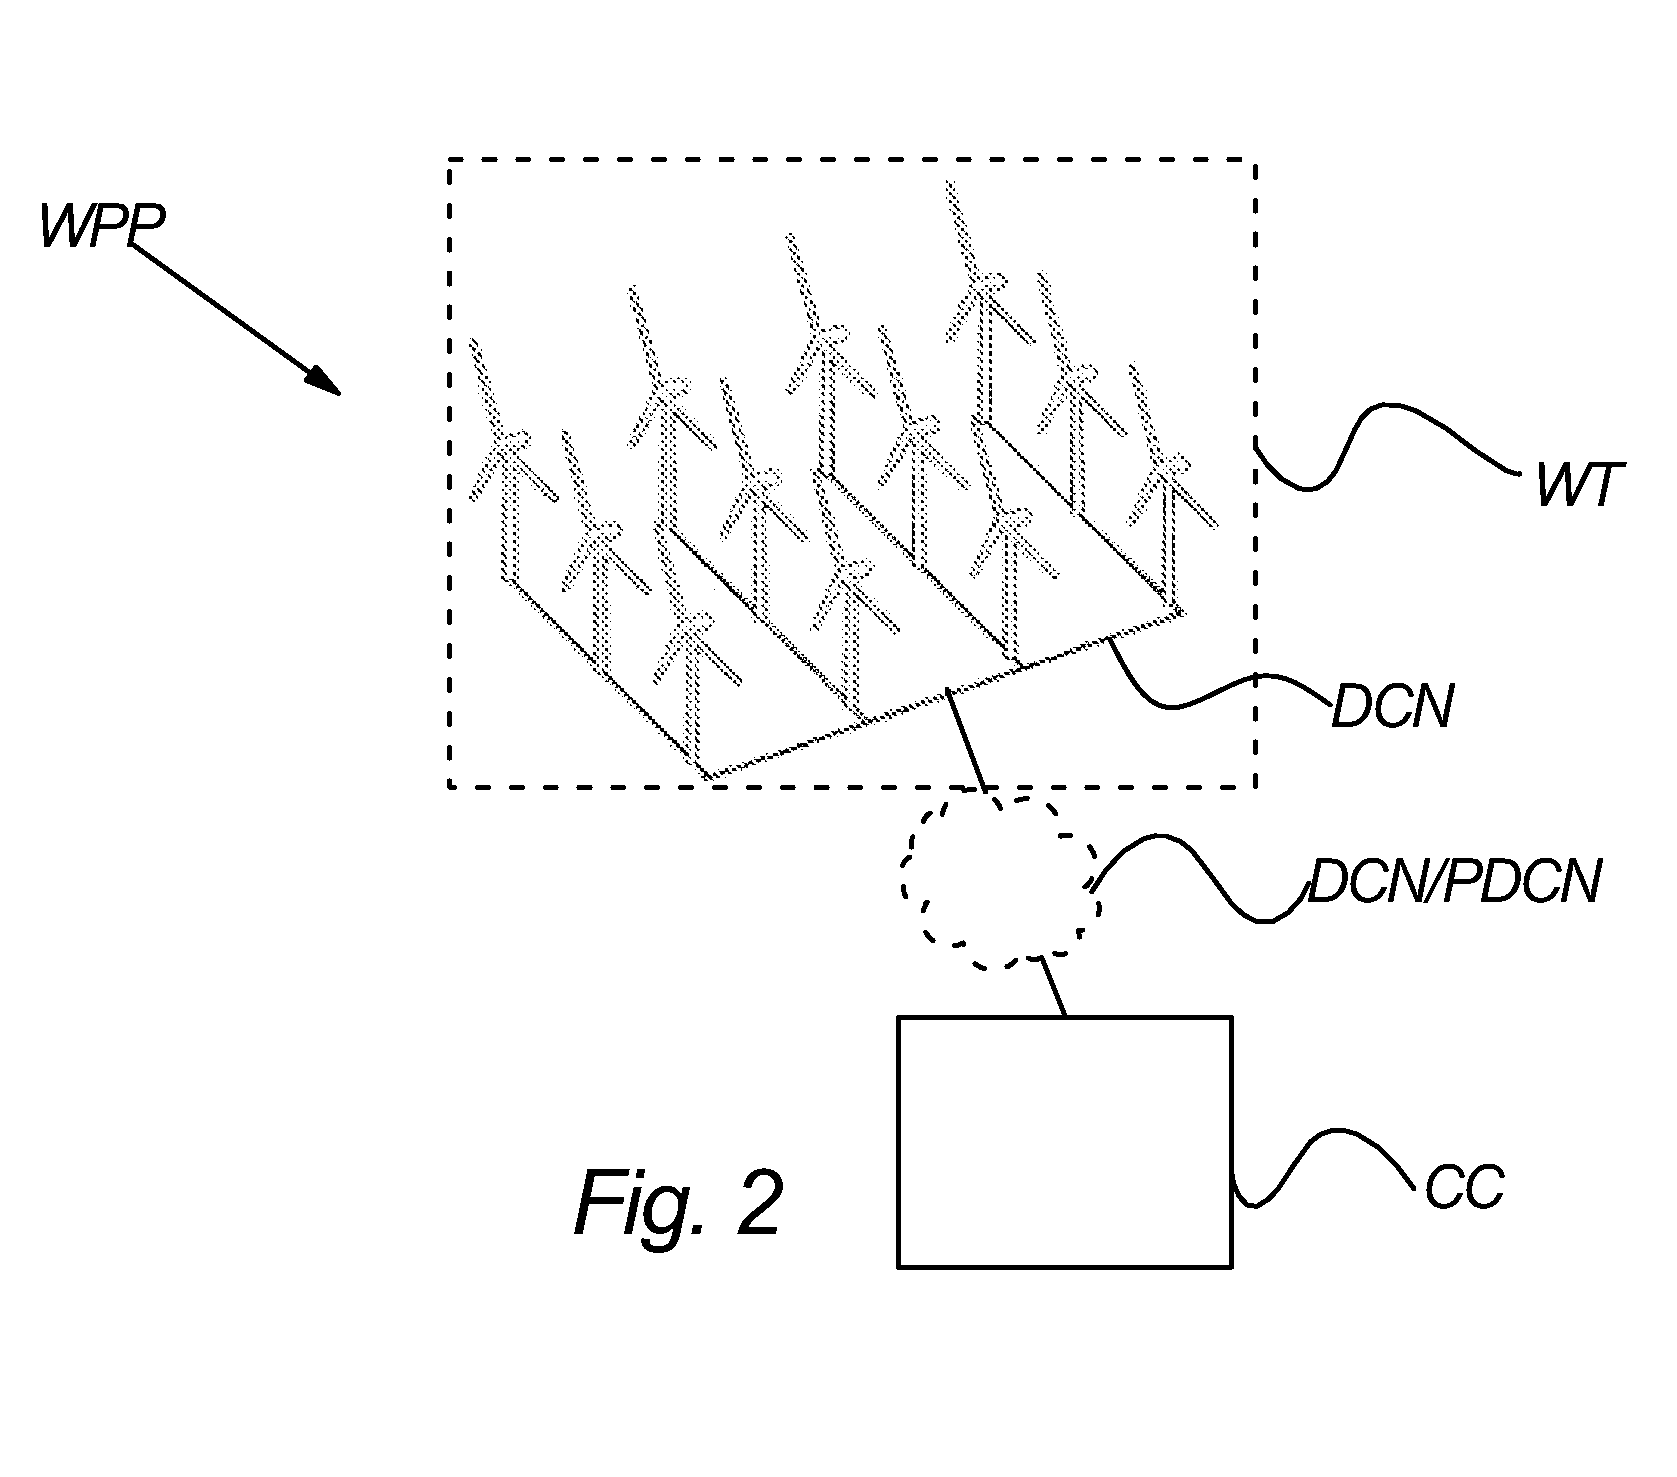 System and method of controlling a wind turbine in a wind power plant